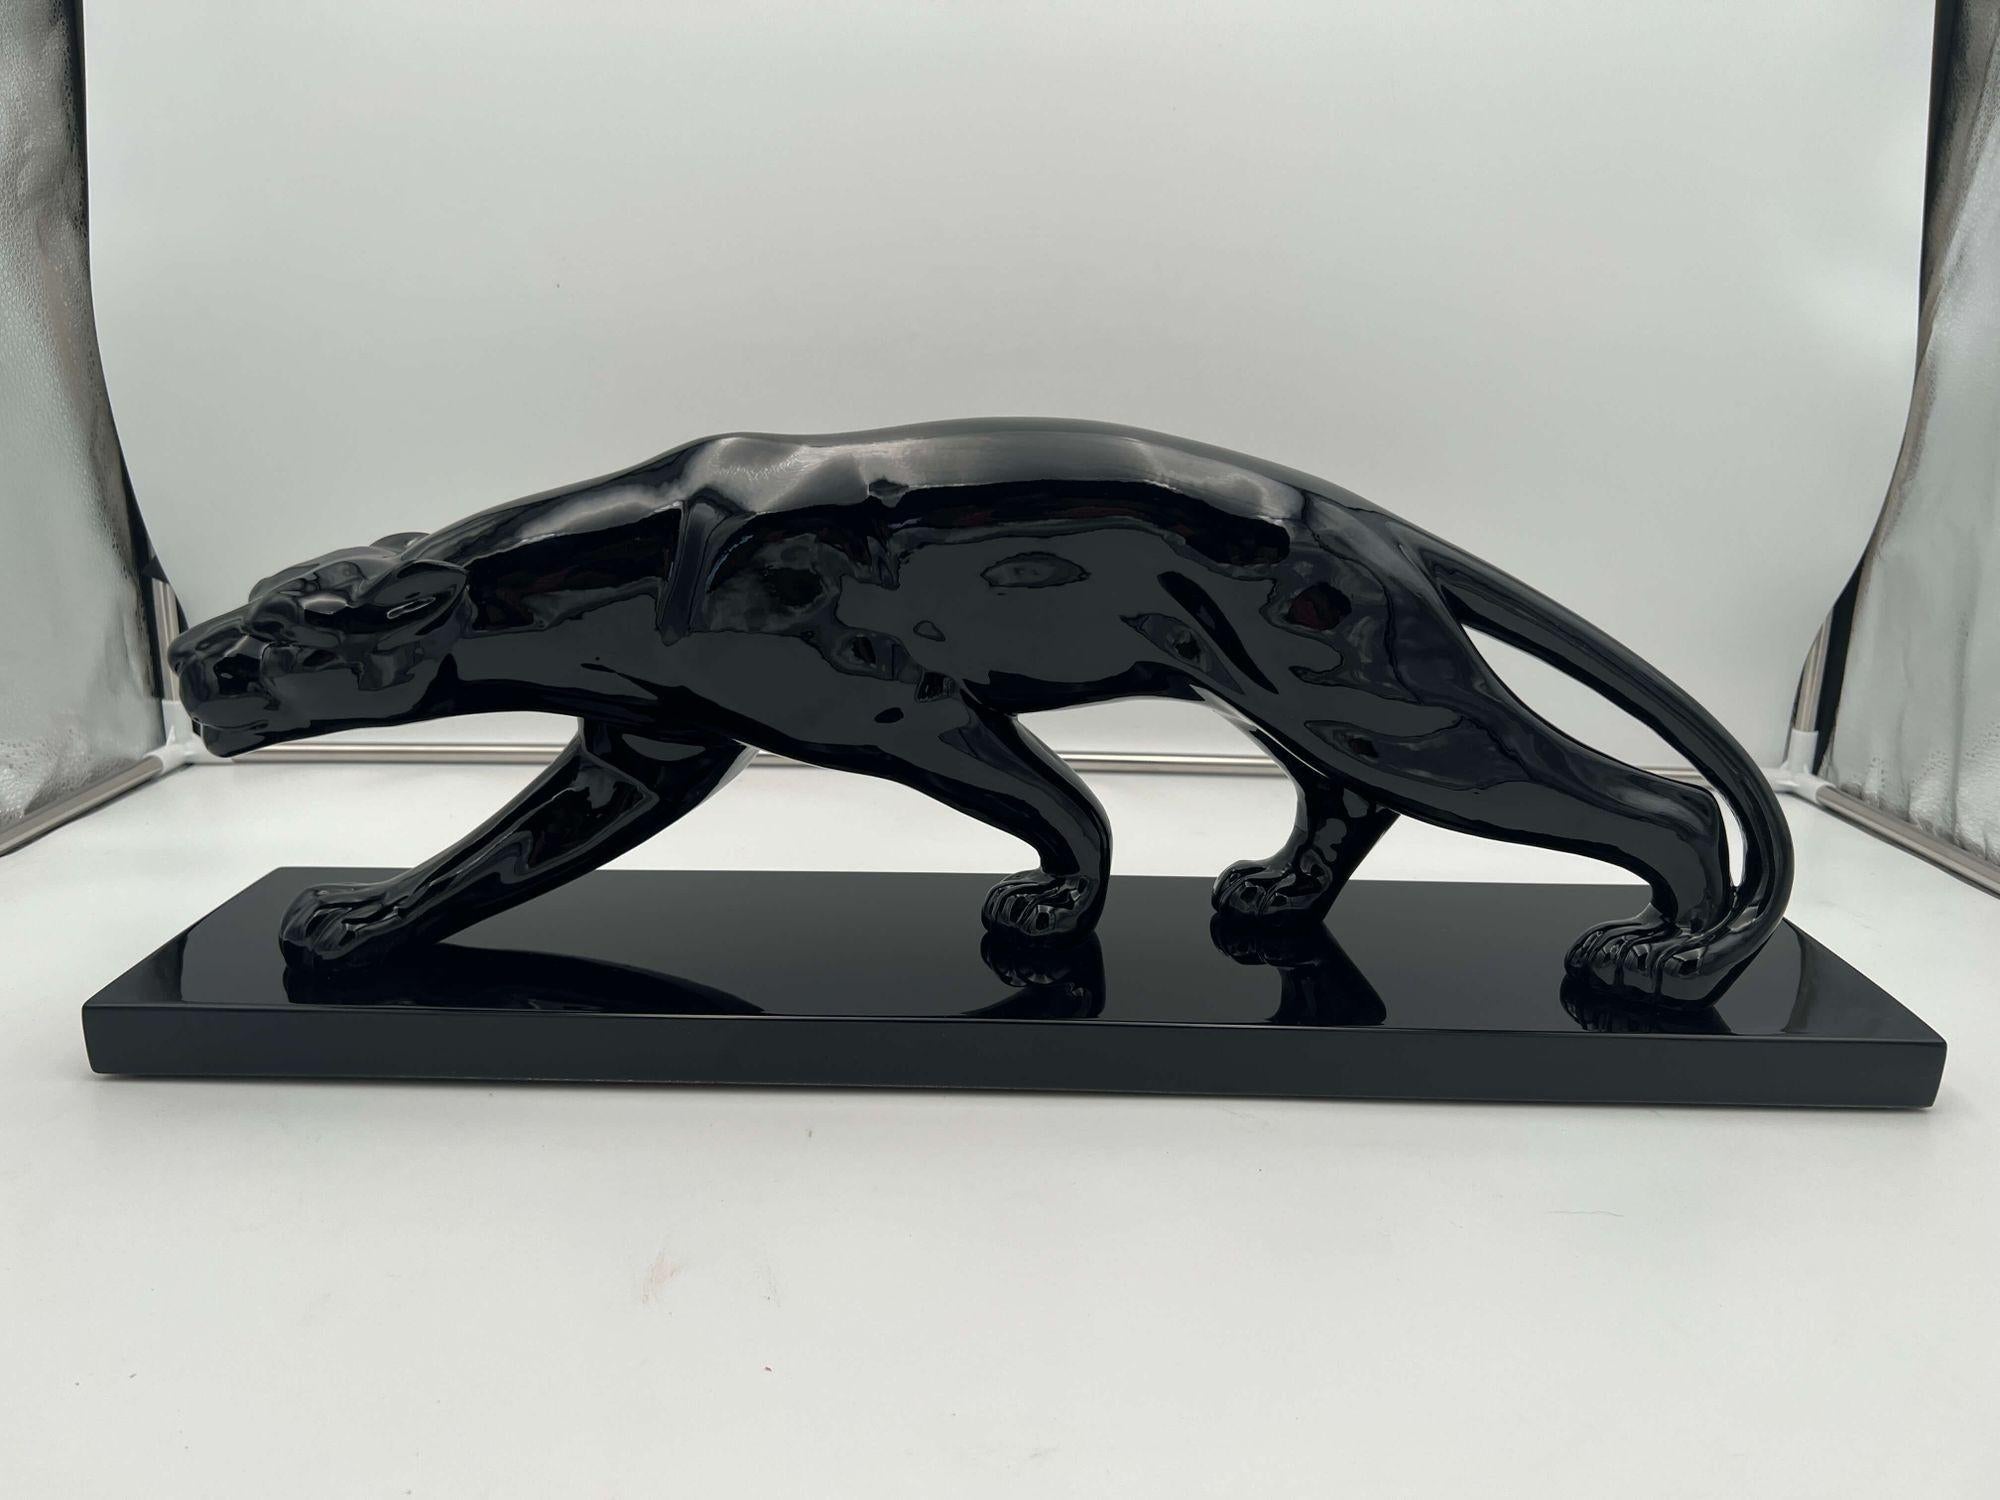 Original Art Deco Panther sculpture from France, Paris around 1930.
 
Model after Salvatore Melani (1902-1934), based on Paul Jouve's panther drawings.
Ceramic mass on rectangular wooden base. Coated with black piano lacquer and polished to high